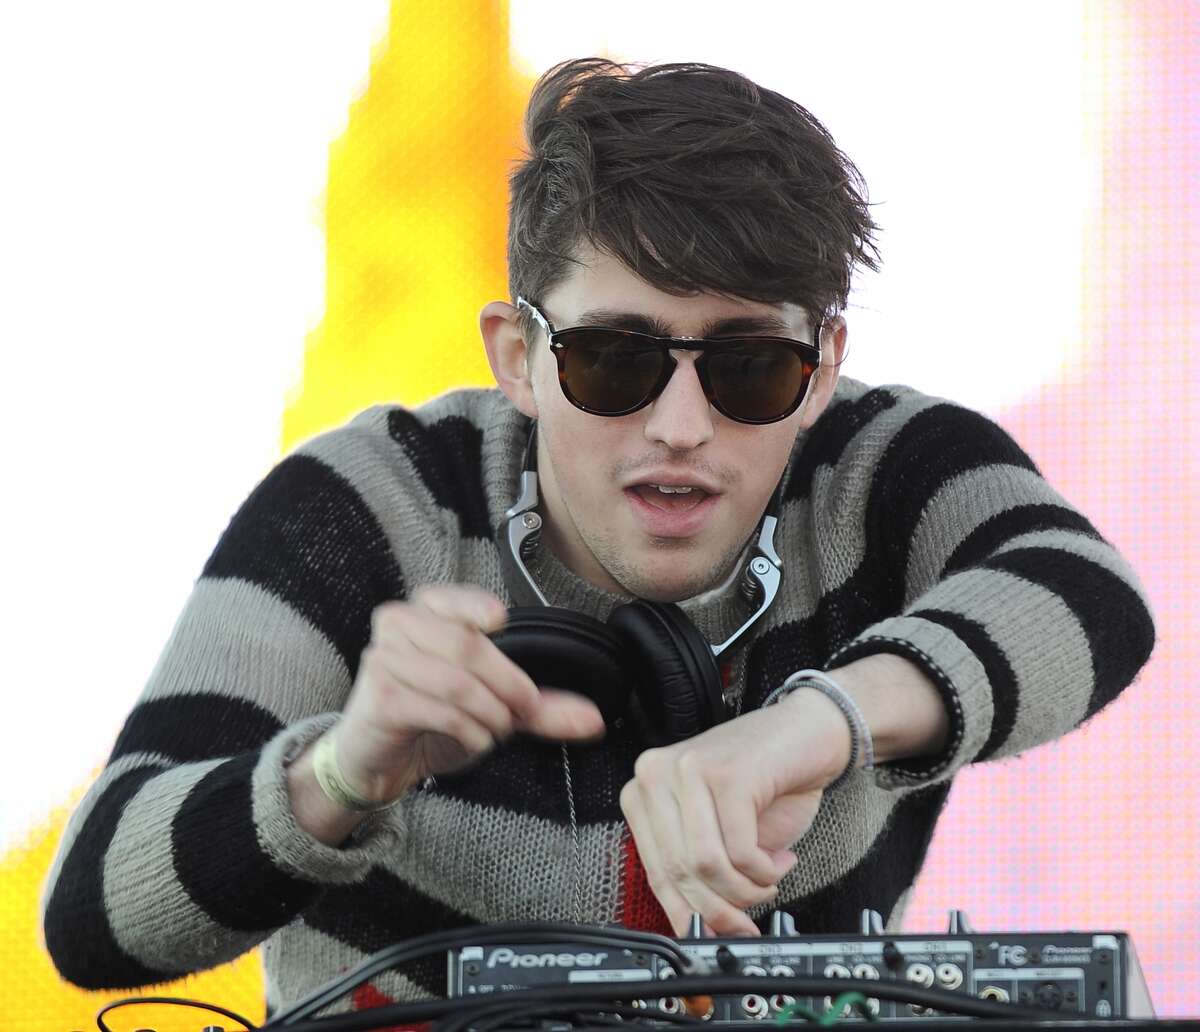 SAN FRANCISCO, CA - OCTOBER 13: Porter Robinson performs as part of the Treasure Island Music Festival on October 13, 2012 in San Francisco, California. (Photo by Tim Mosenfelder/Getty Images)